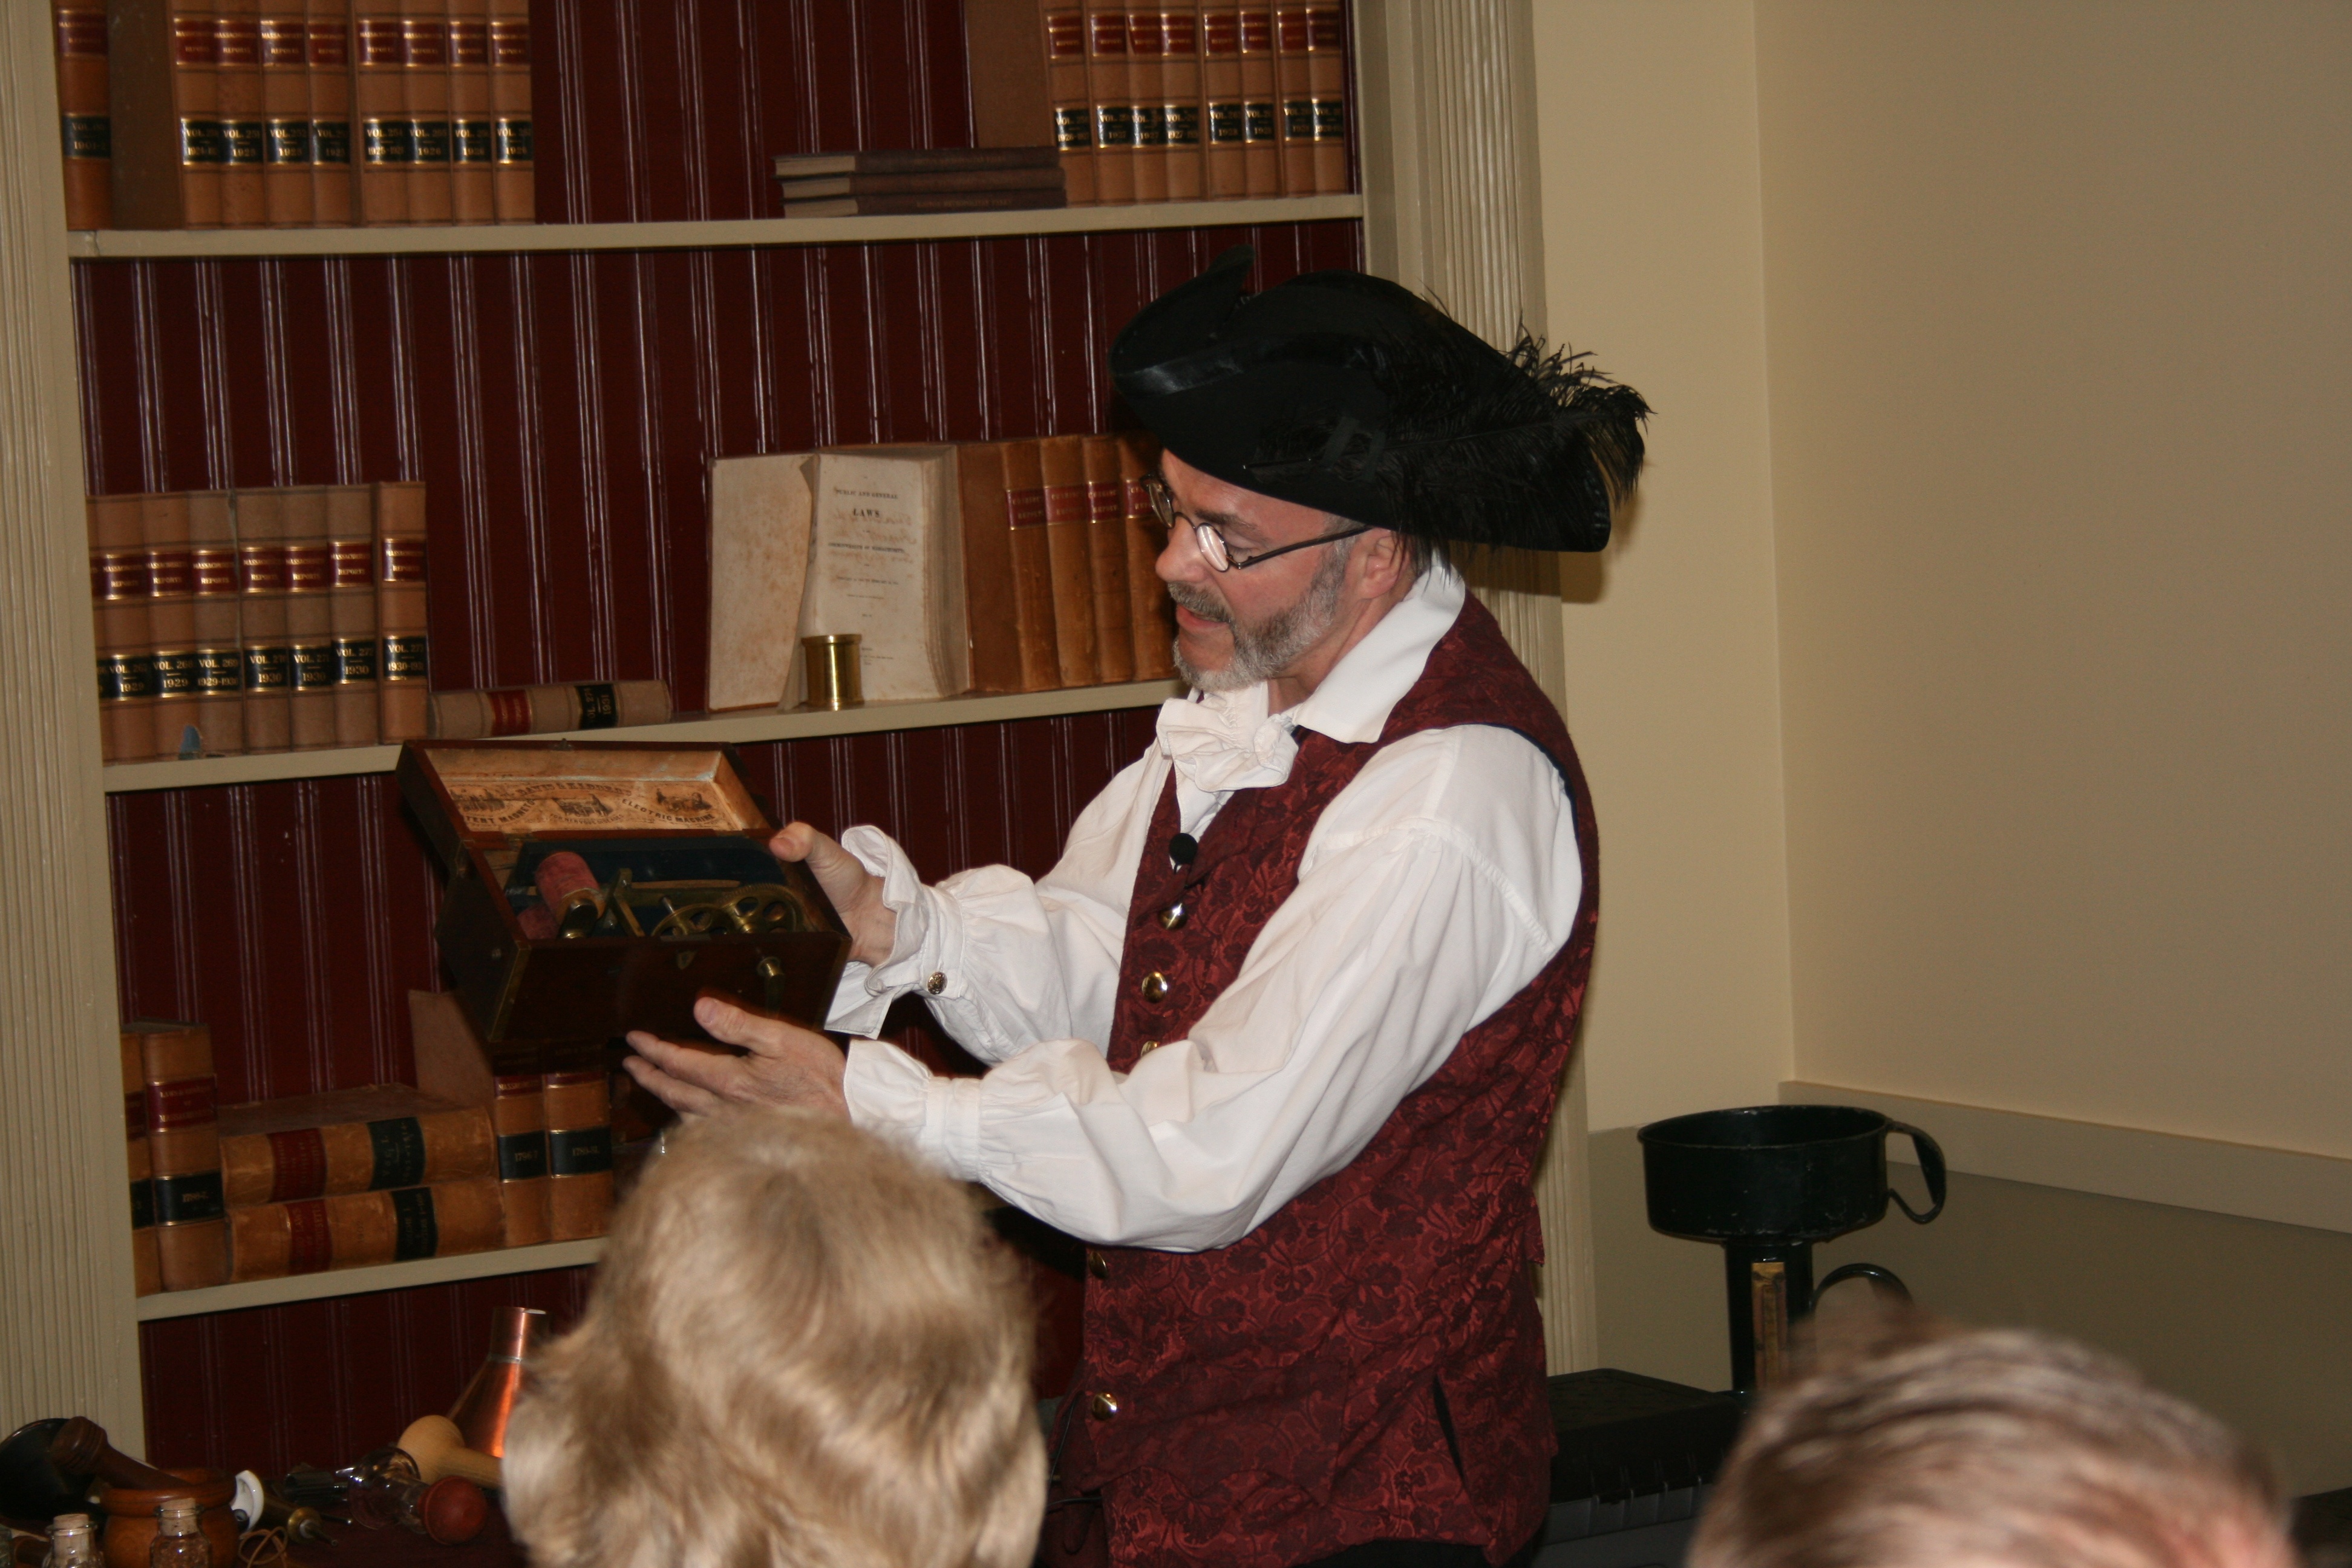 Education event at the Plympton Historical Society